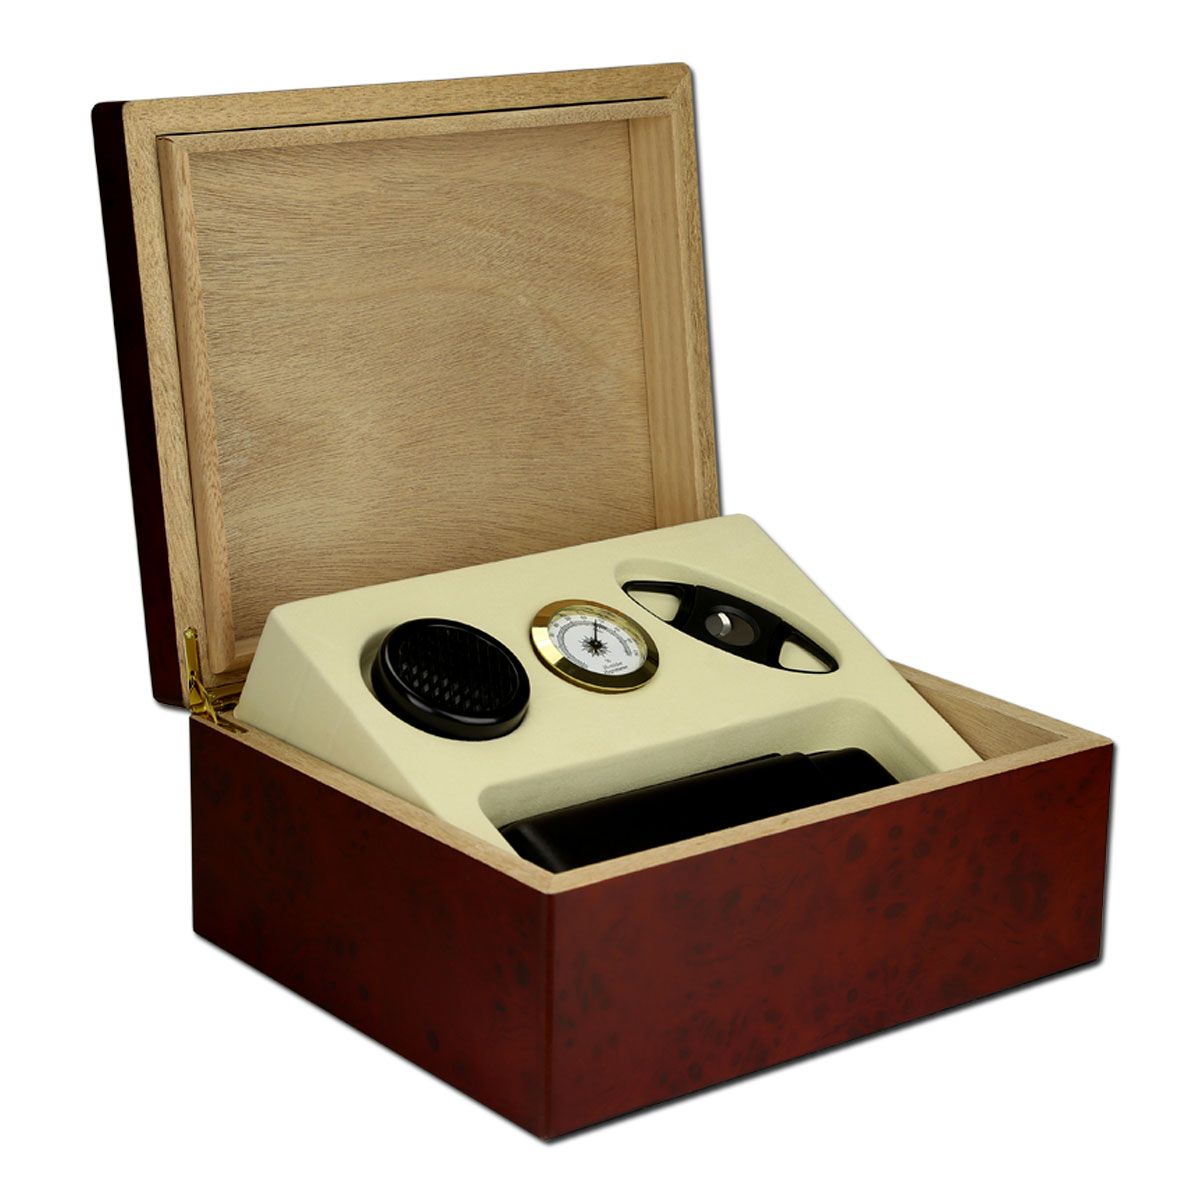 se Siden Tulipaner Hand Crafted 12-8125bg Executive Burl Cigar Humidor Kit by Torched Products  | CustomMade.com